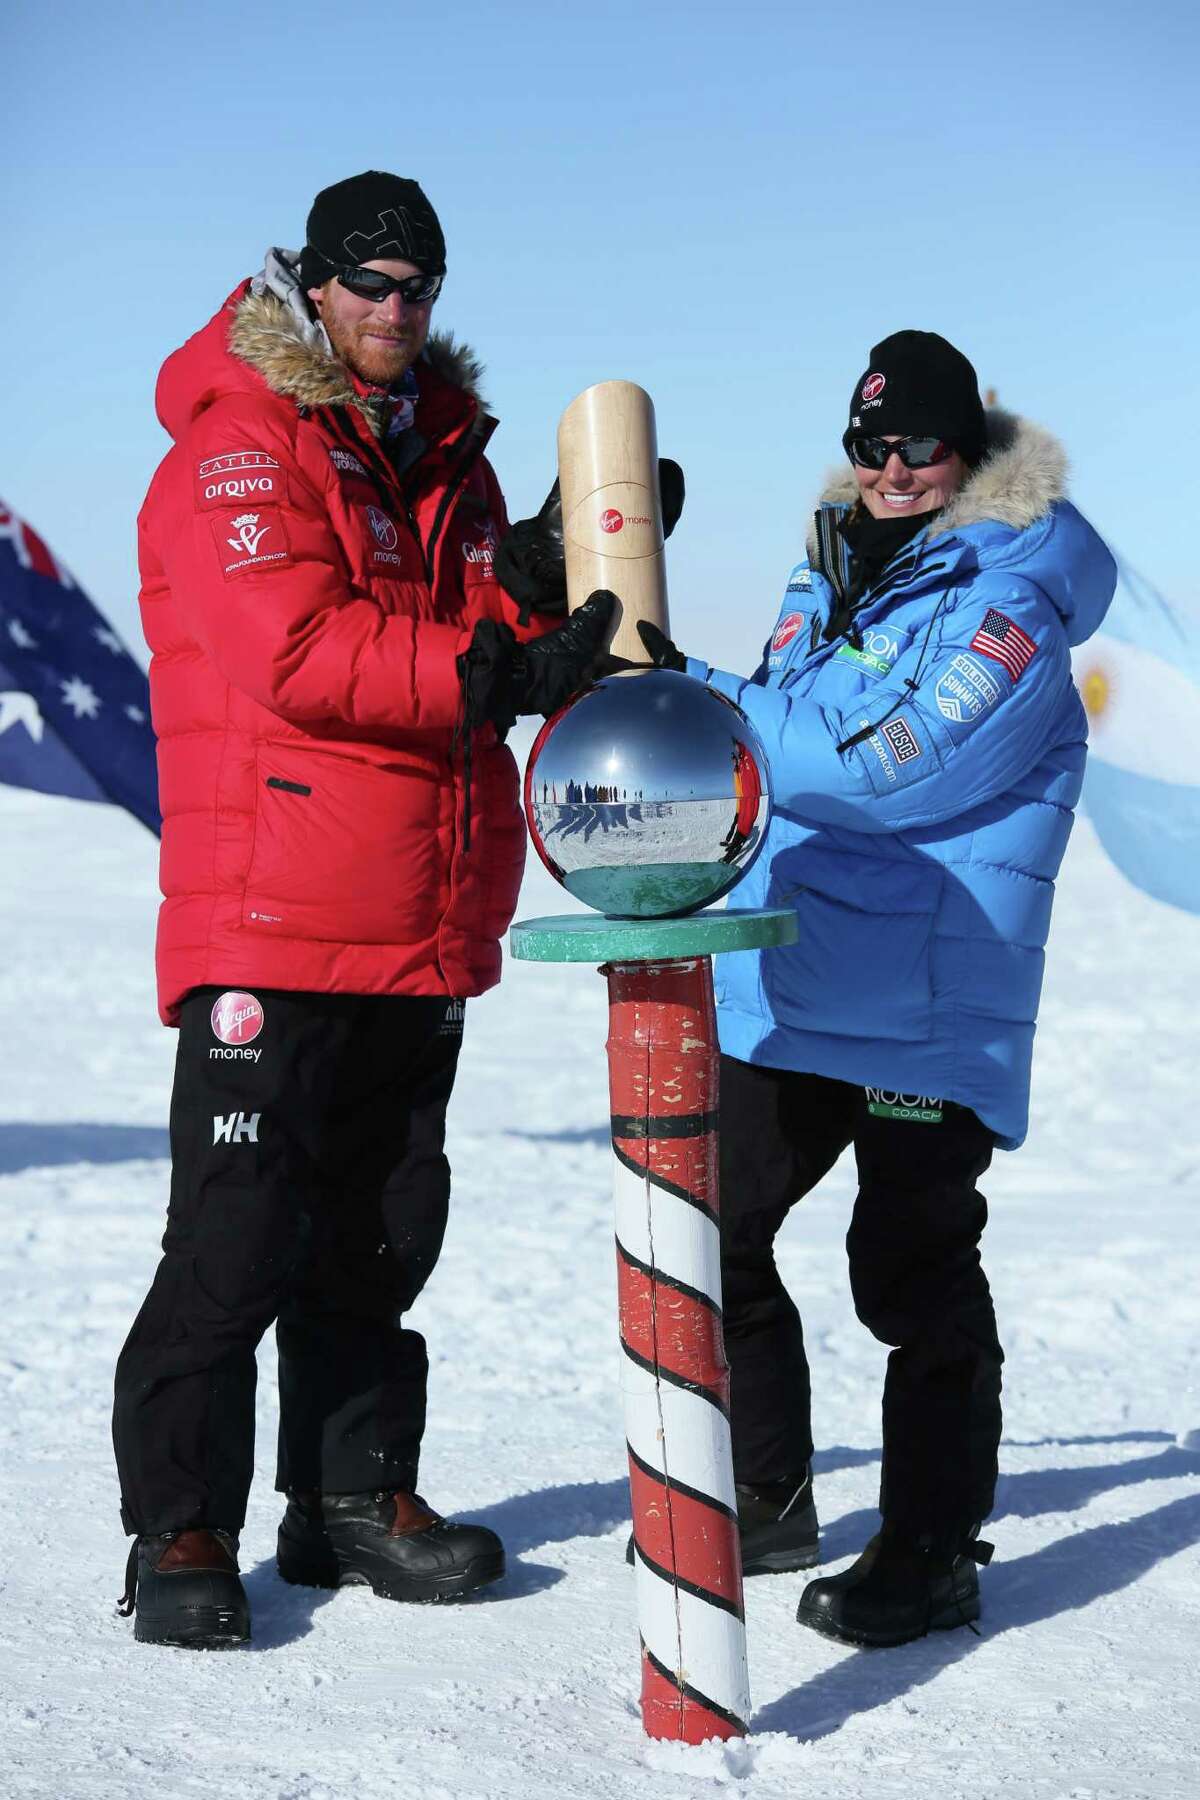 After more than three weeks of pulling sleds across the frozen wastes of Antartica, Prince Harry, right, made it to the South Pole as part of the Walking with the Wounded charity trek. The Britain-based charity funds training for wounded service members to find employment.